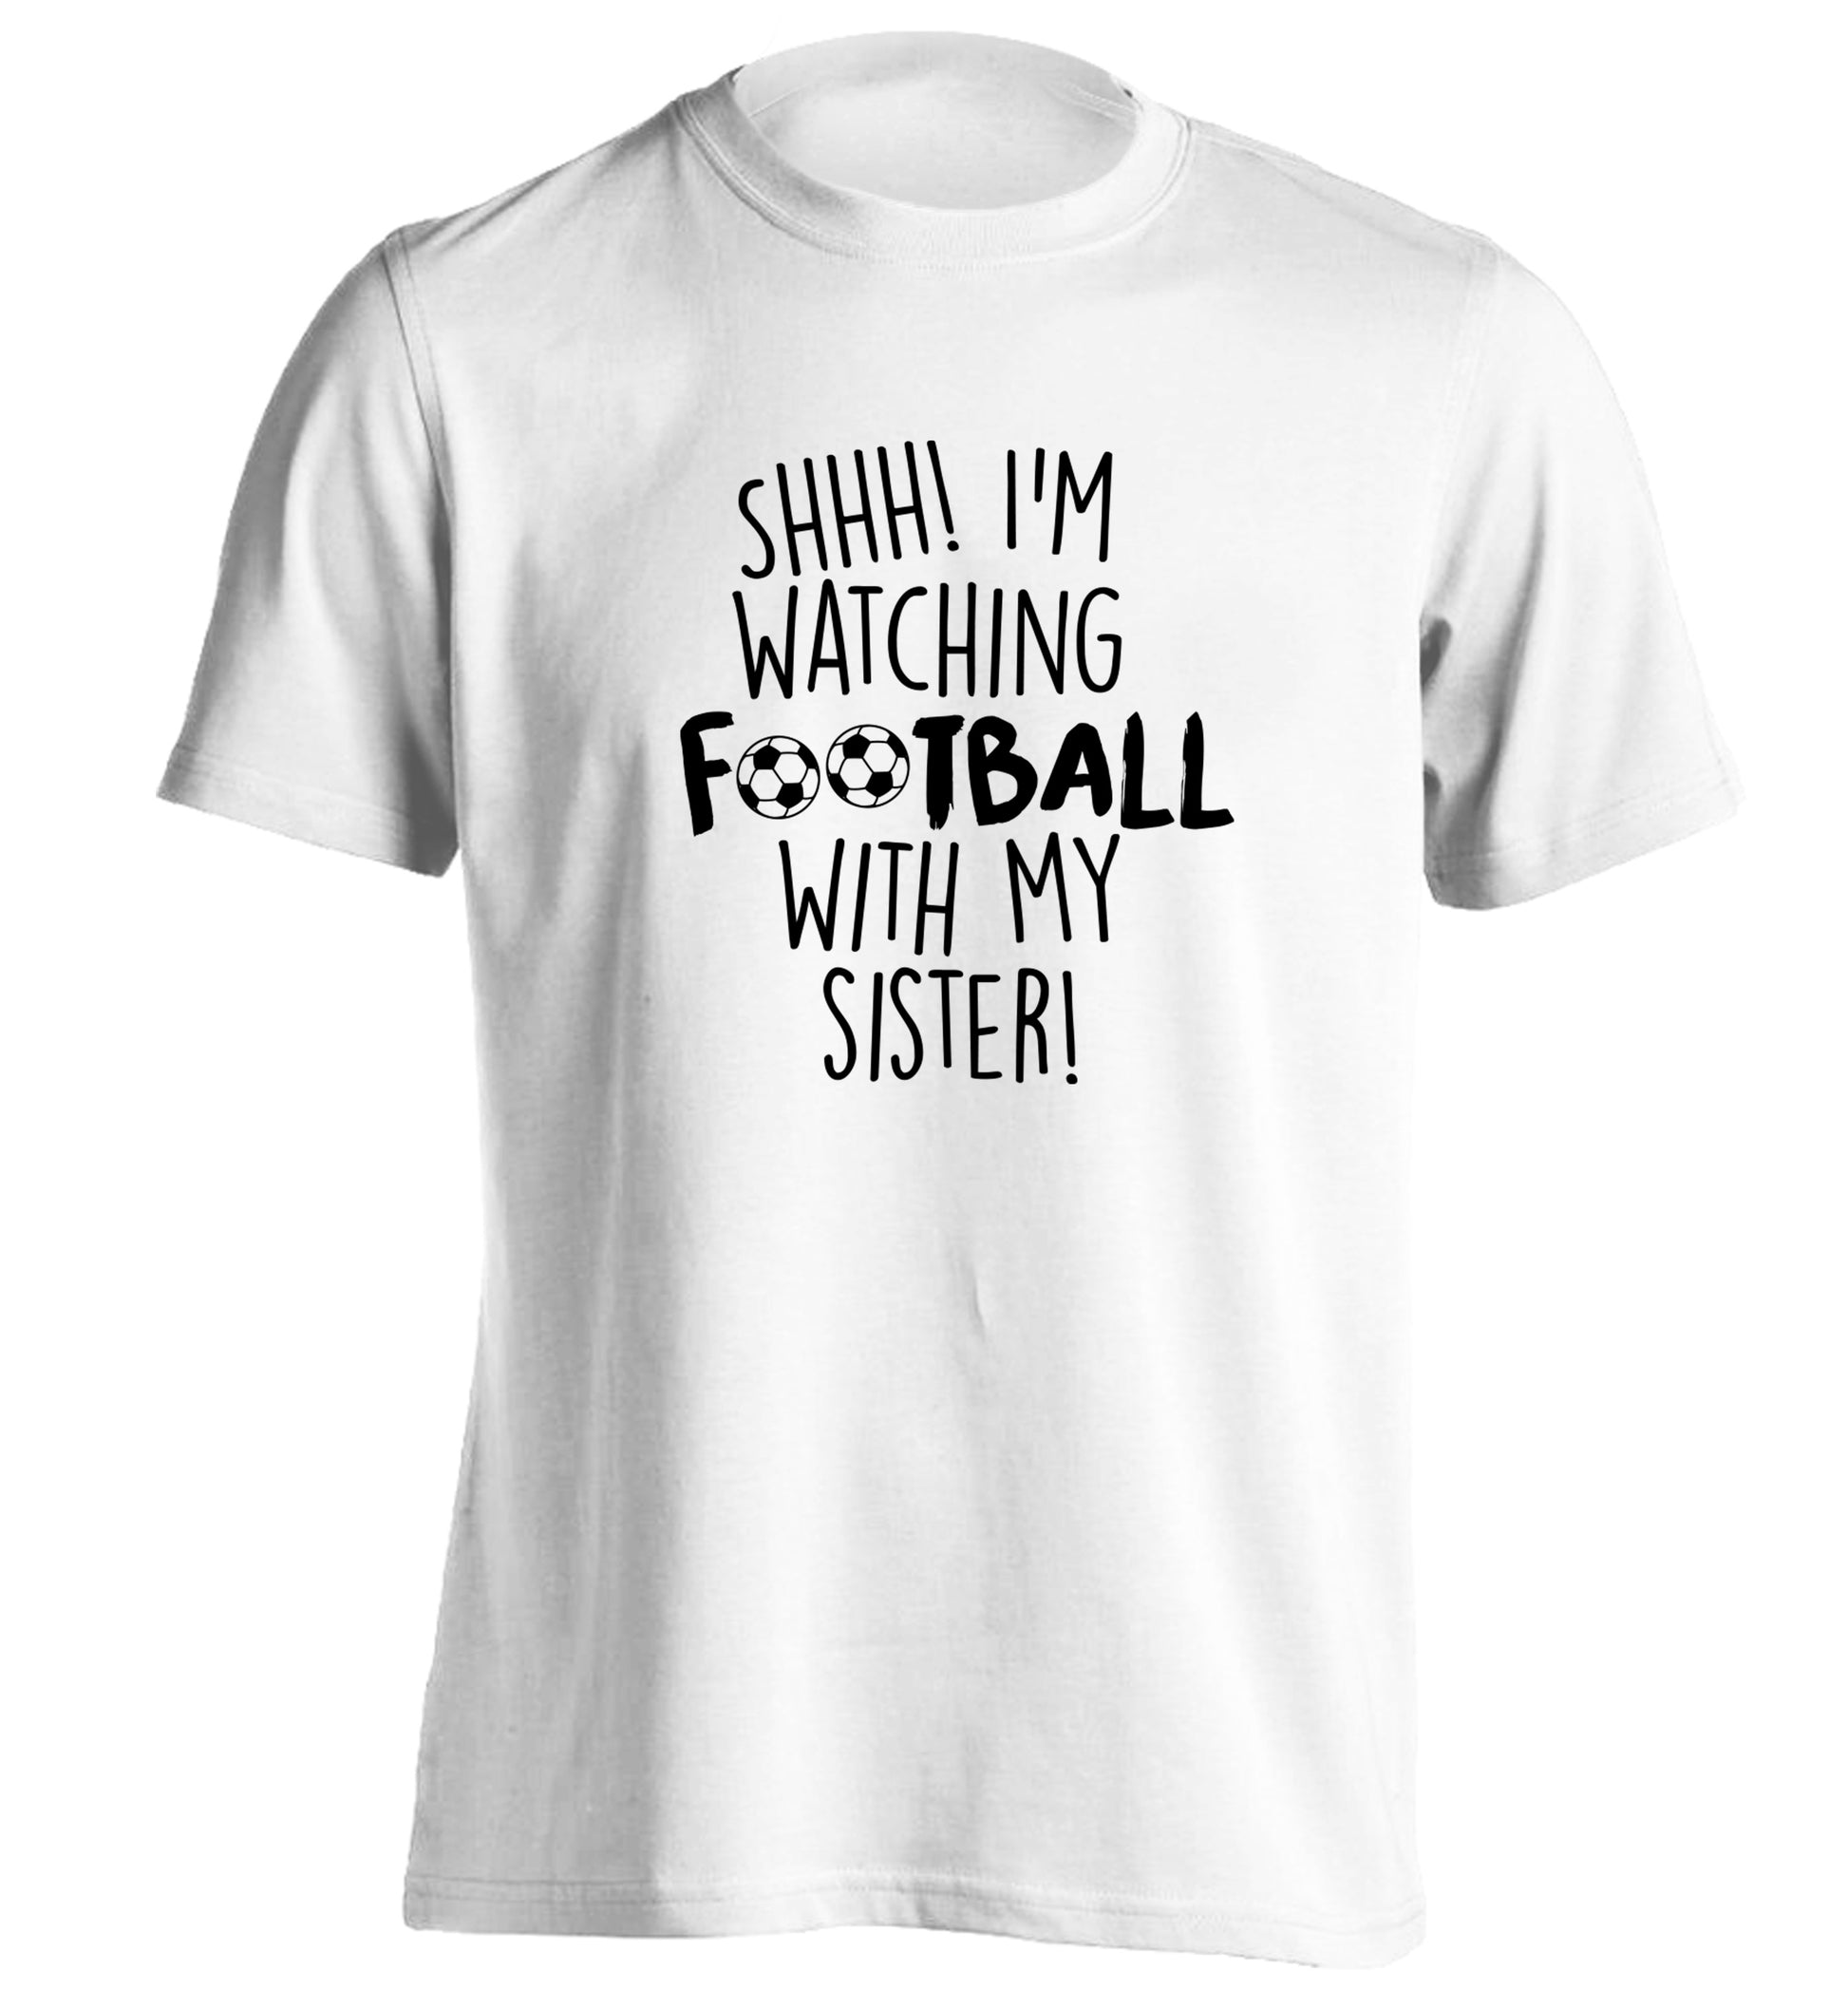 Shhh I'm watching football with my sister adults unisexwhite Tshirt 2XL